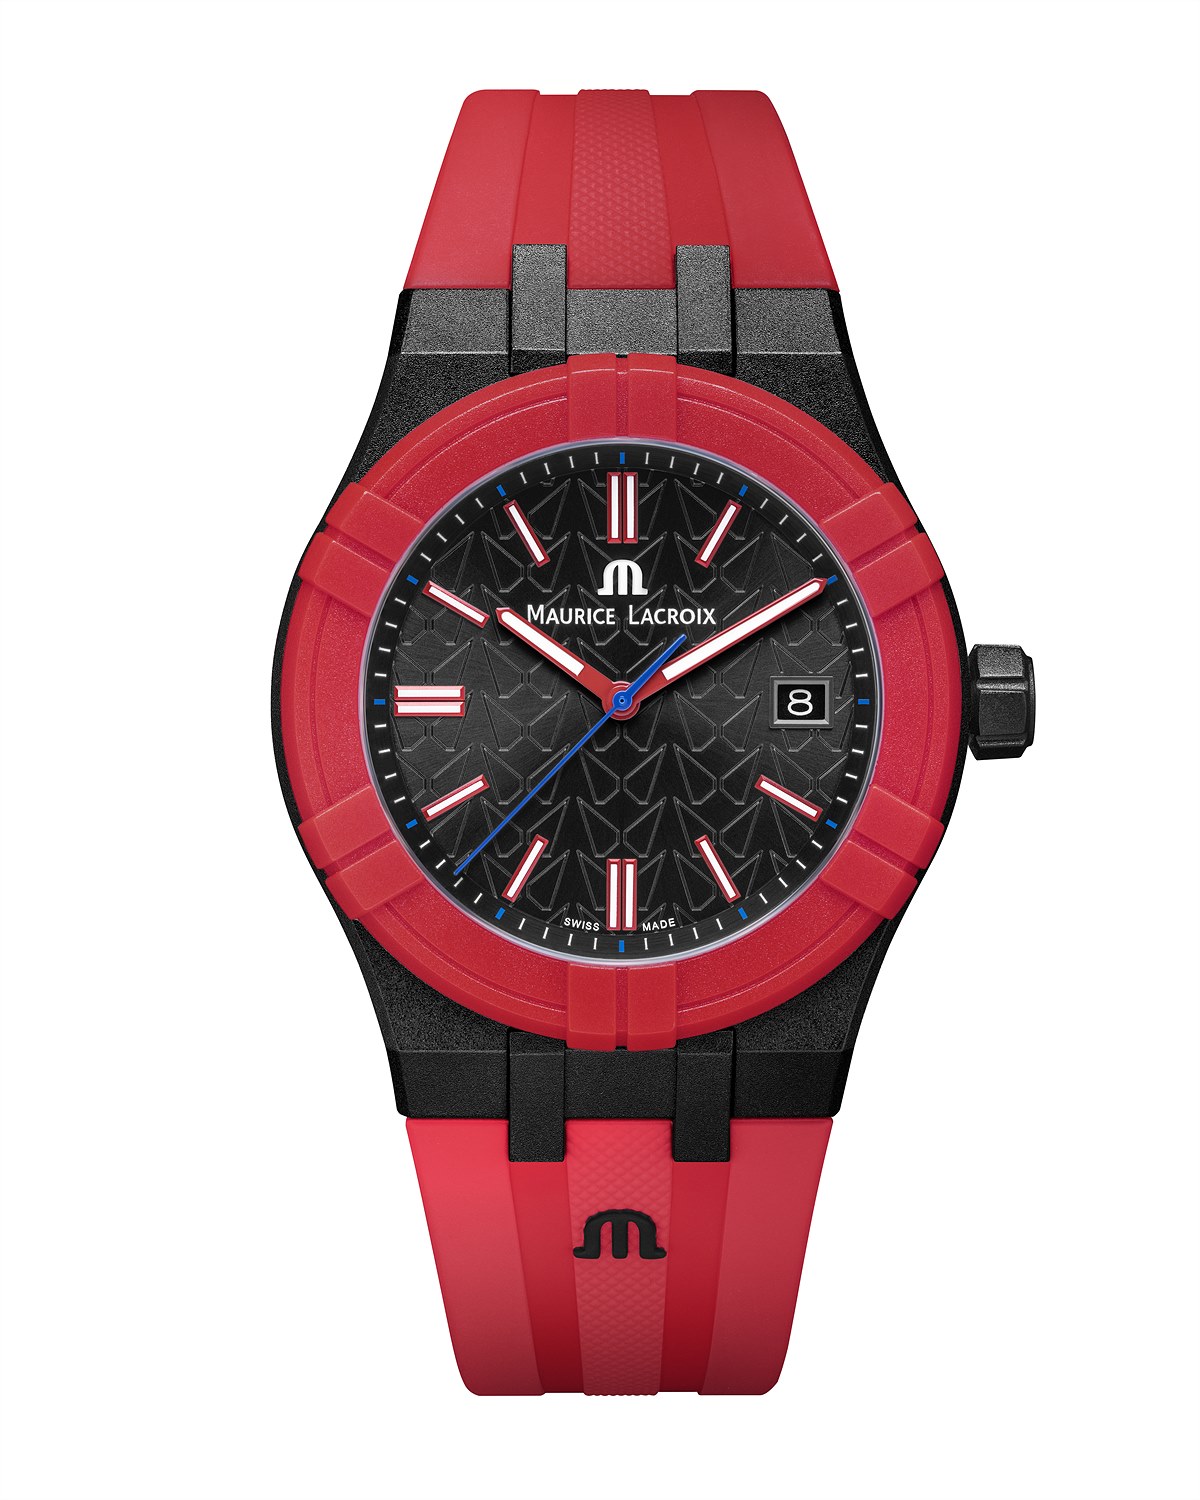 Maurice Lacroix TIDE Mahindra RED_RUBBER € 800,-